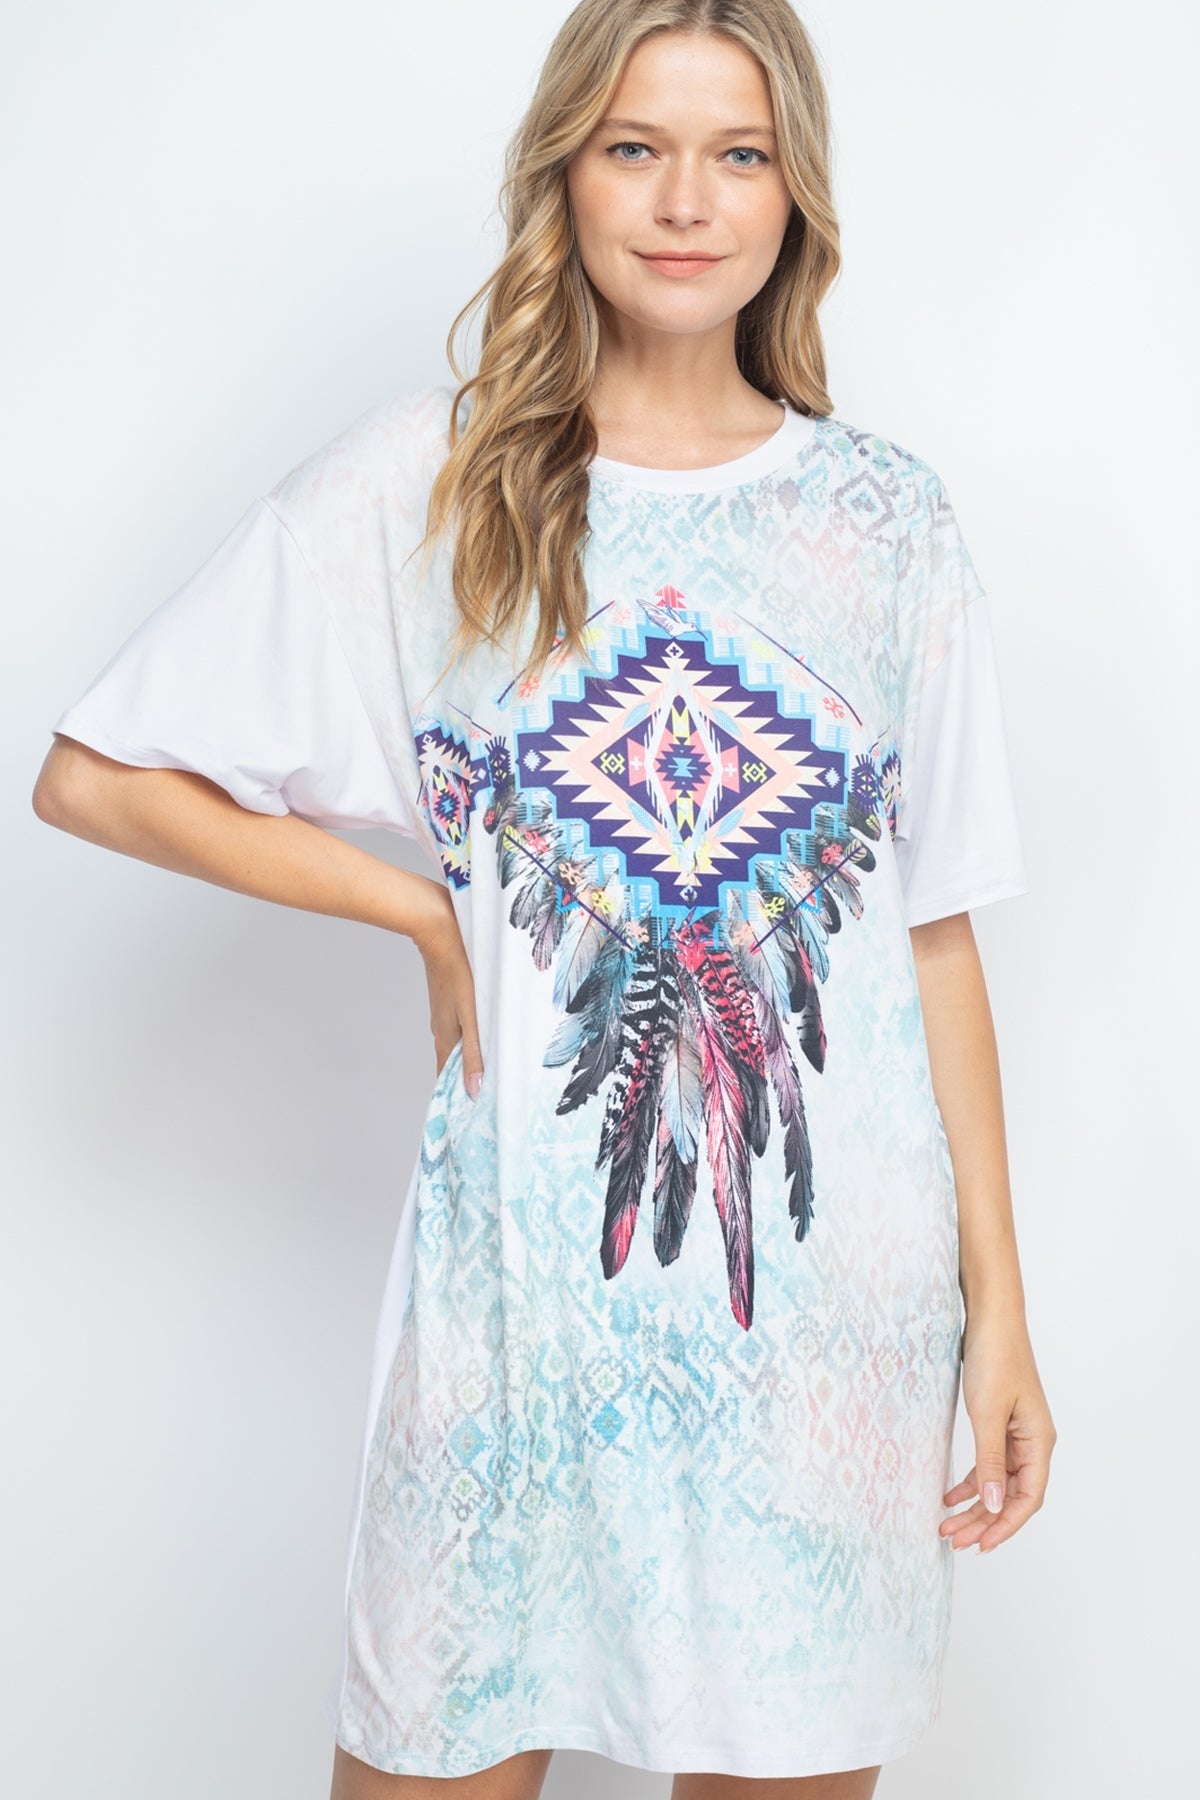 WHITE FEATHER PRINT DRESS  (NOW $3.50 ONLY!)